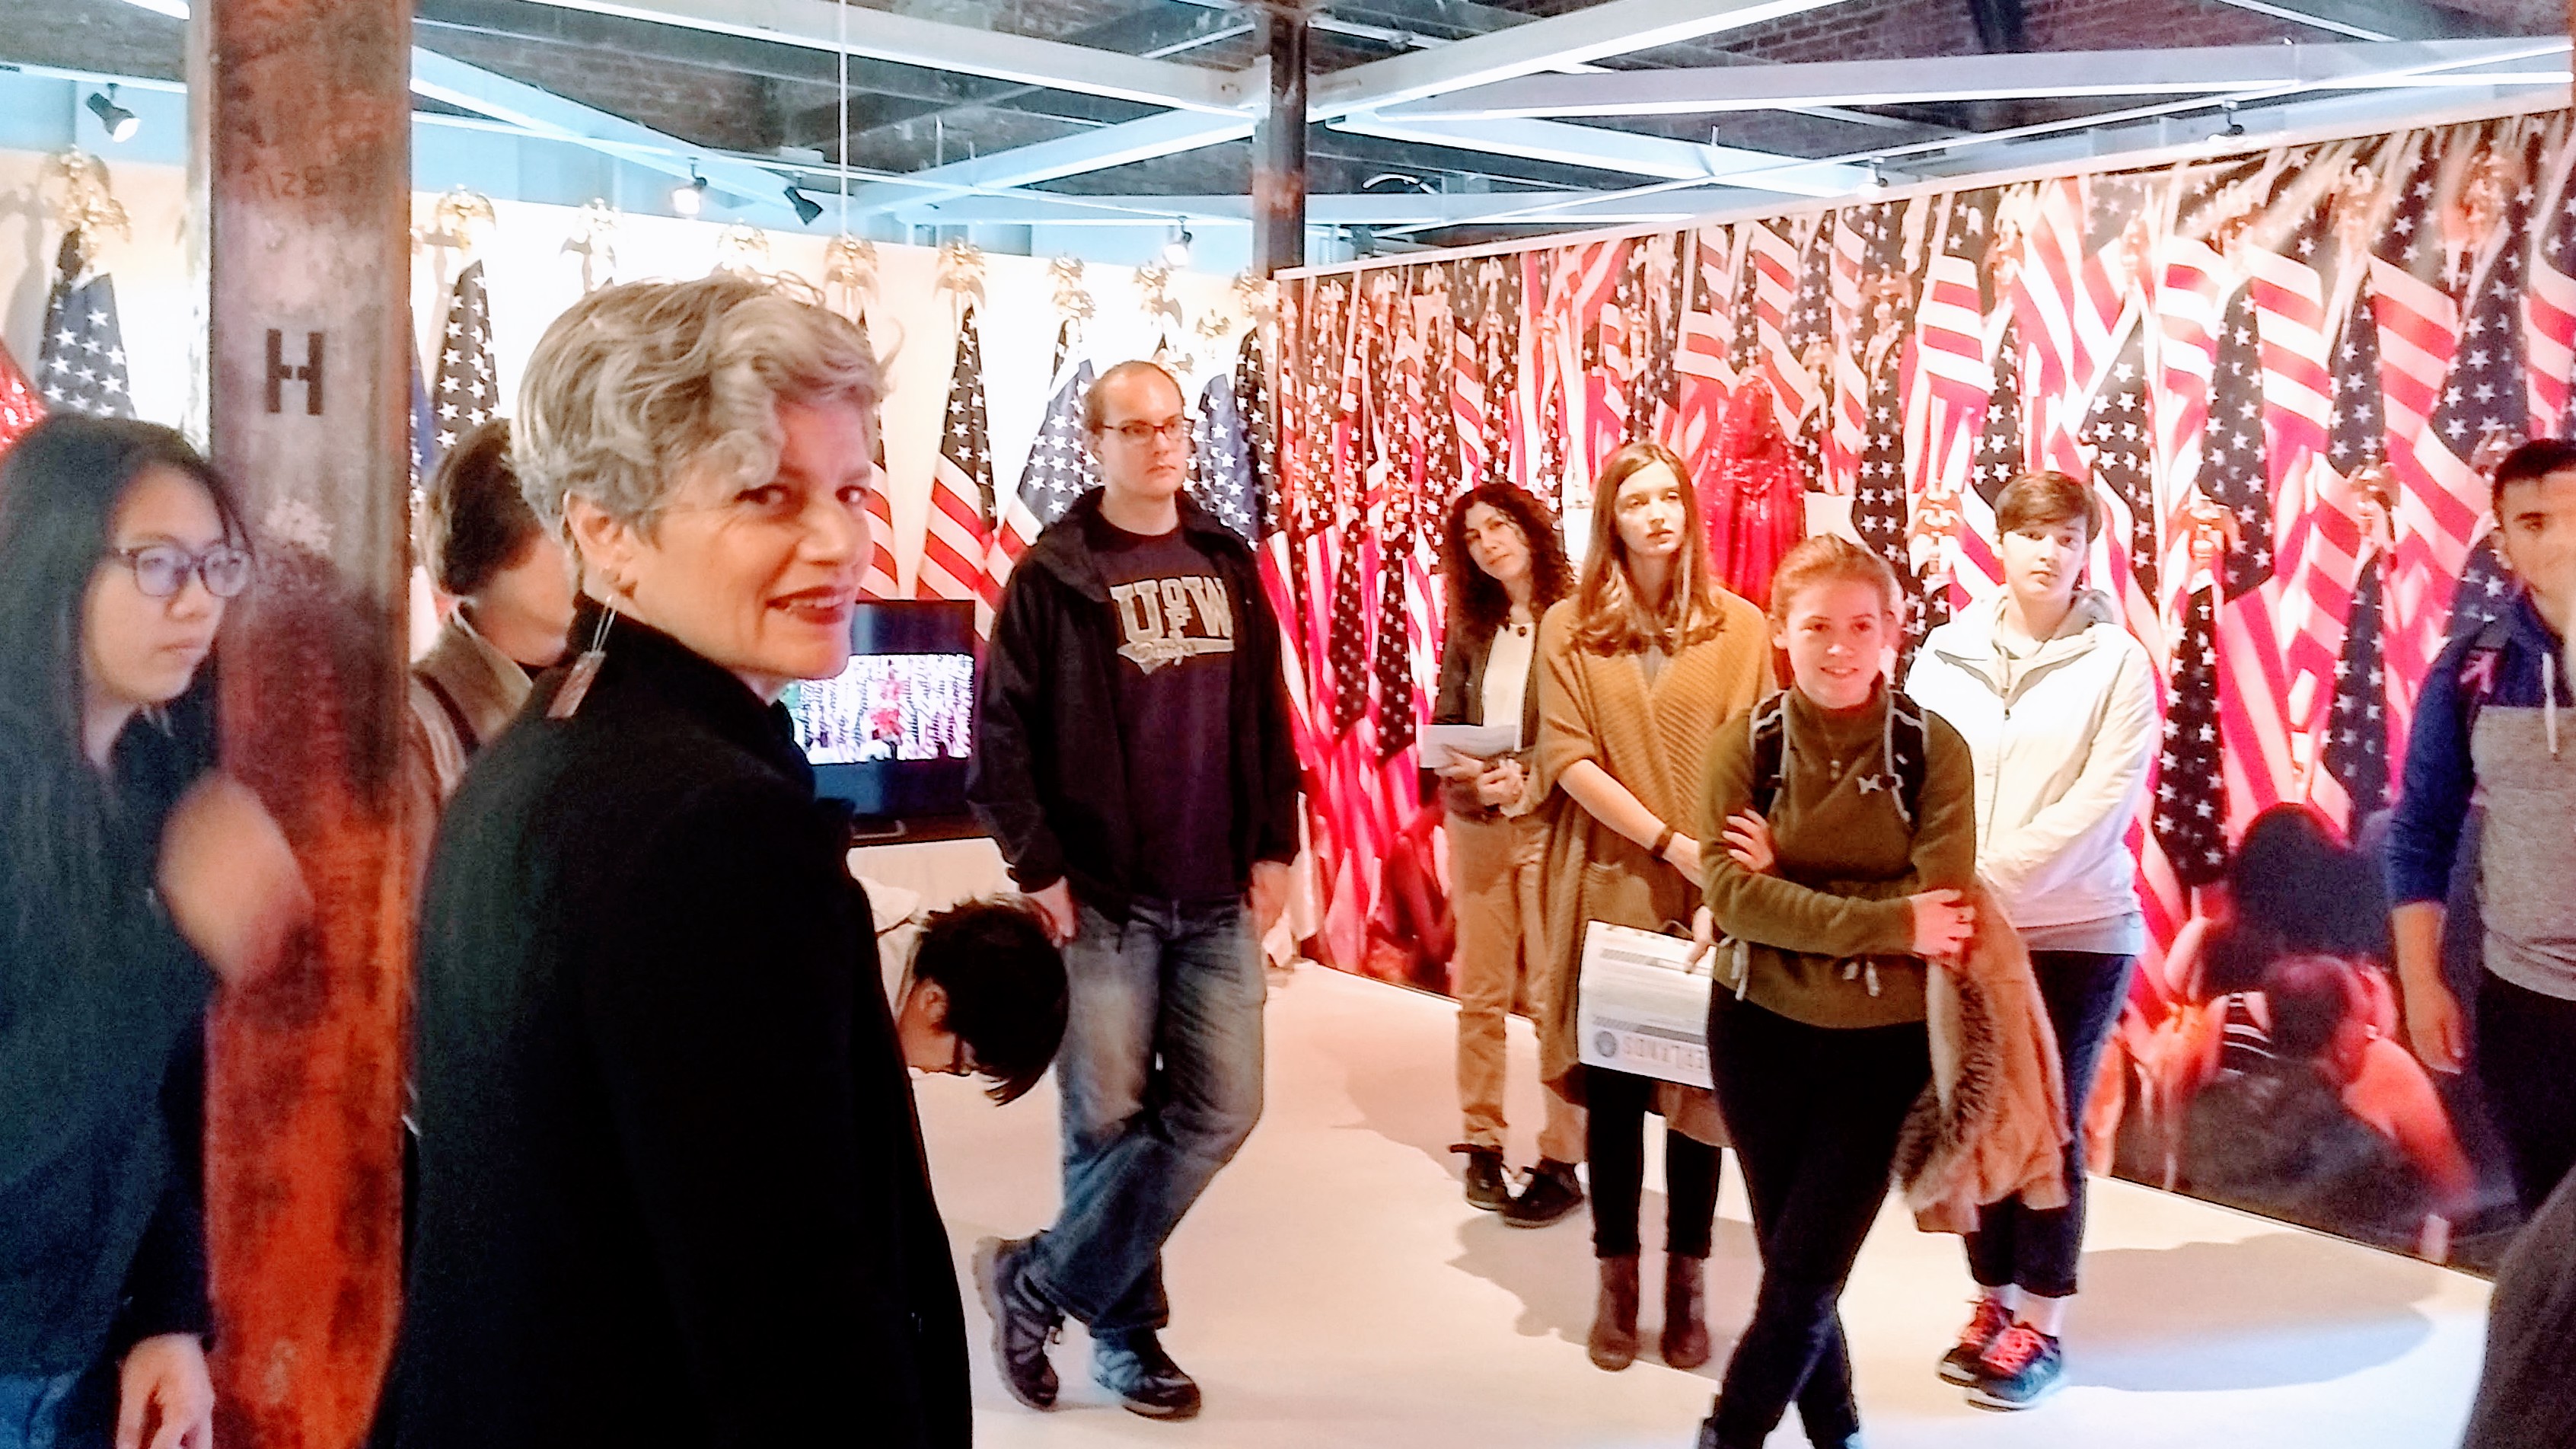 Students in front of art installation using American flags, video, and red sequin burka